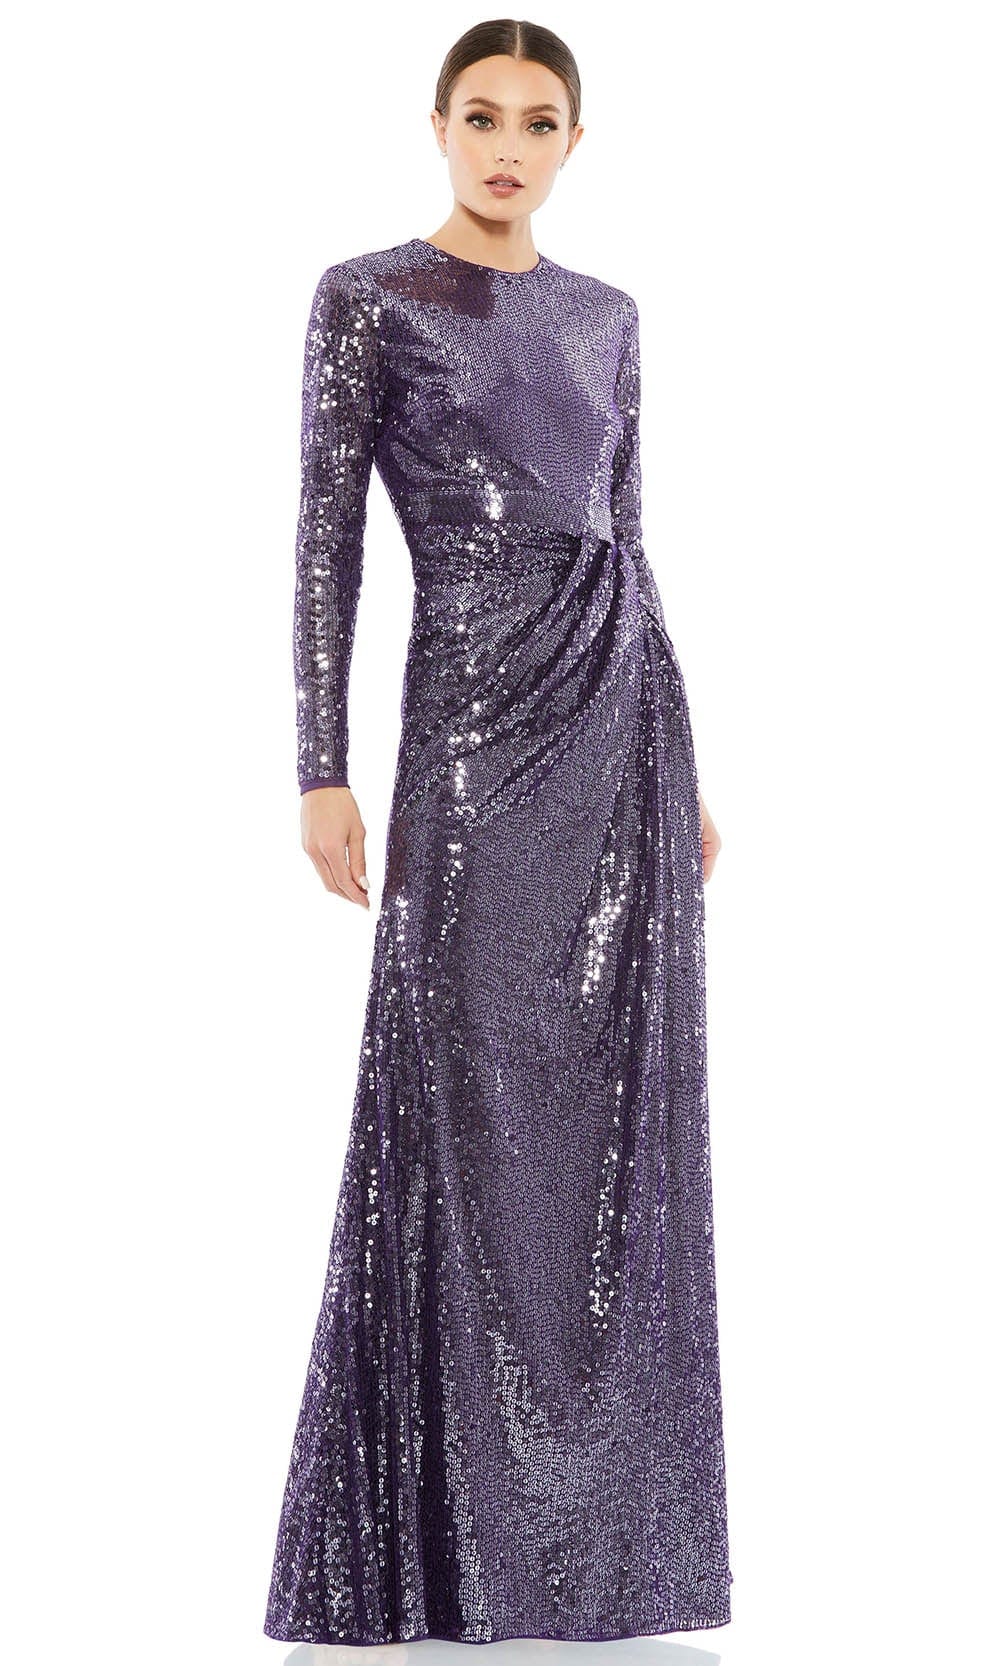 Mac Duggal 10824 - Draped Sequin Evening Gown | Couture Candy Special Occasion Dress 2 / Dark Amethyst